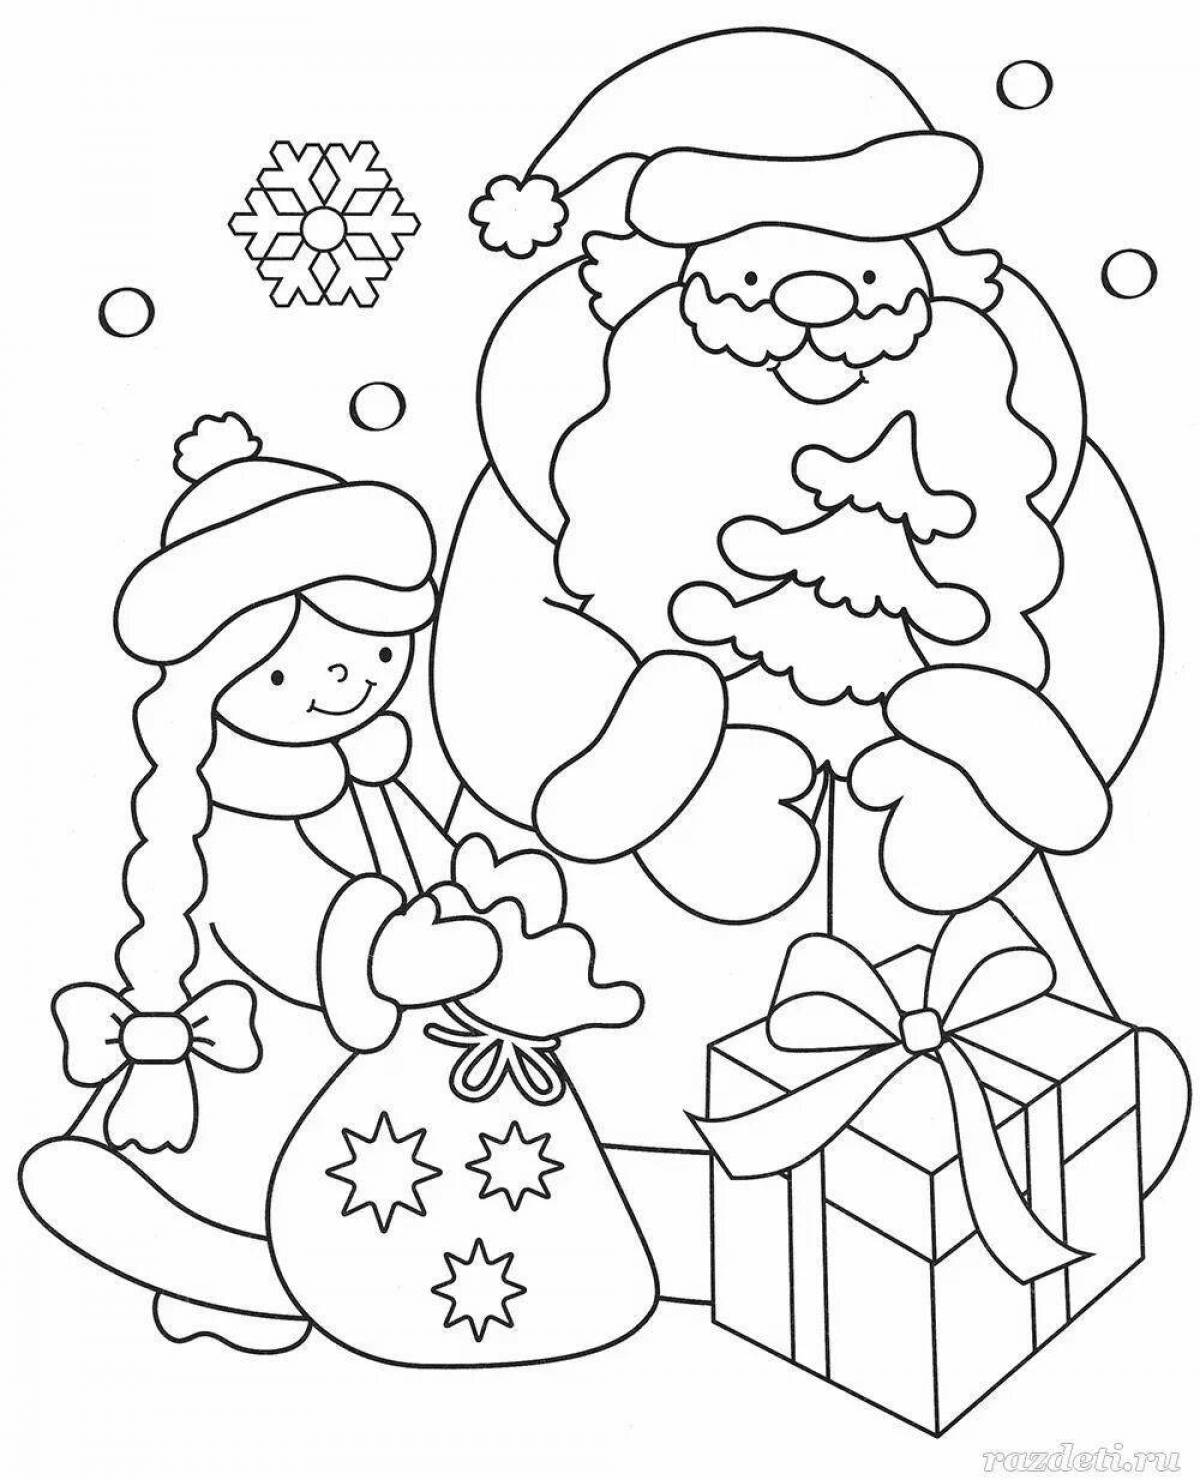 Outstanding Christmas coloring book for toddlers